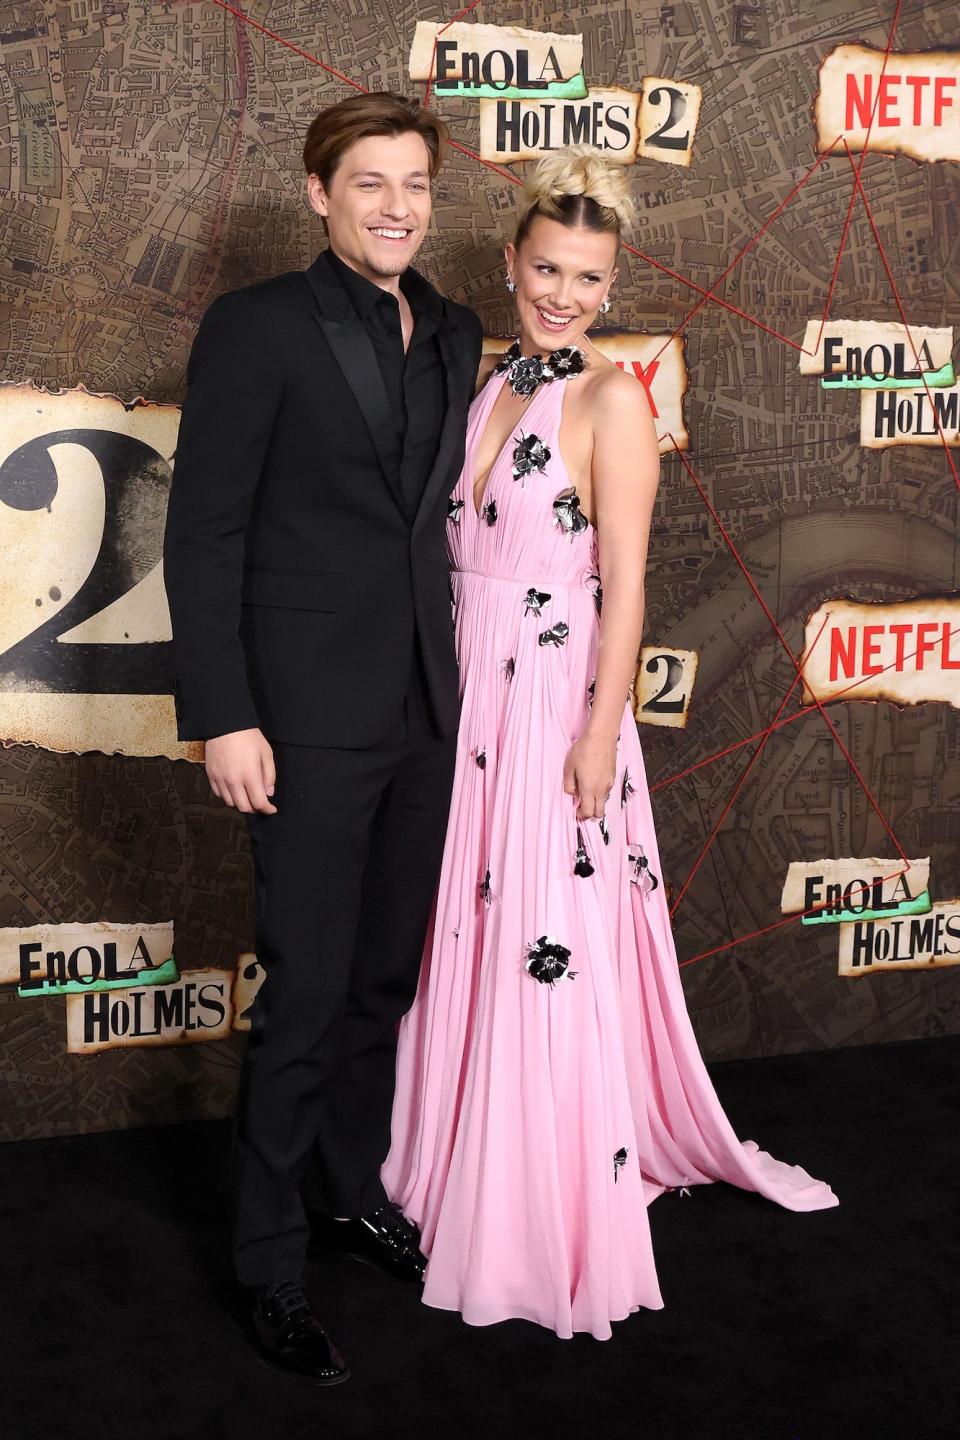 Jake Bongiovi and Millie Bobby Brown at the "Enola Holmes 2" premiere.